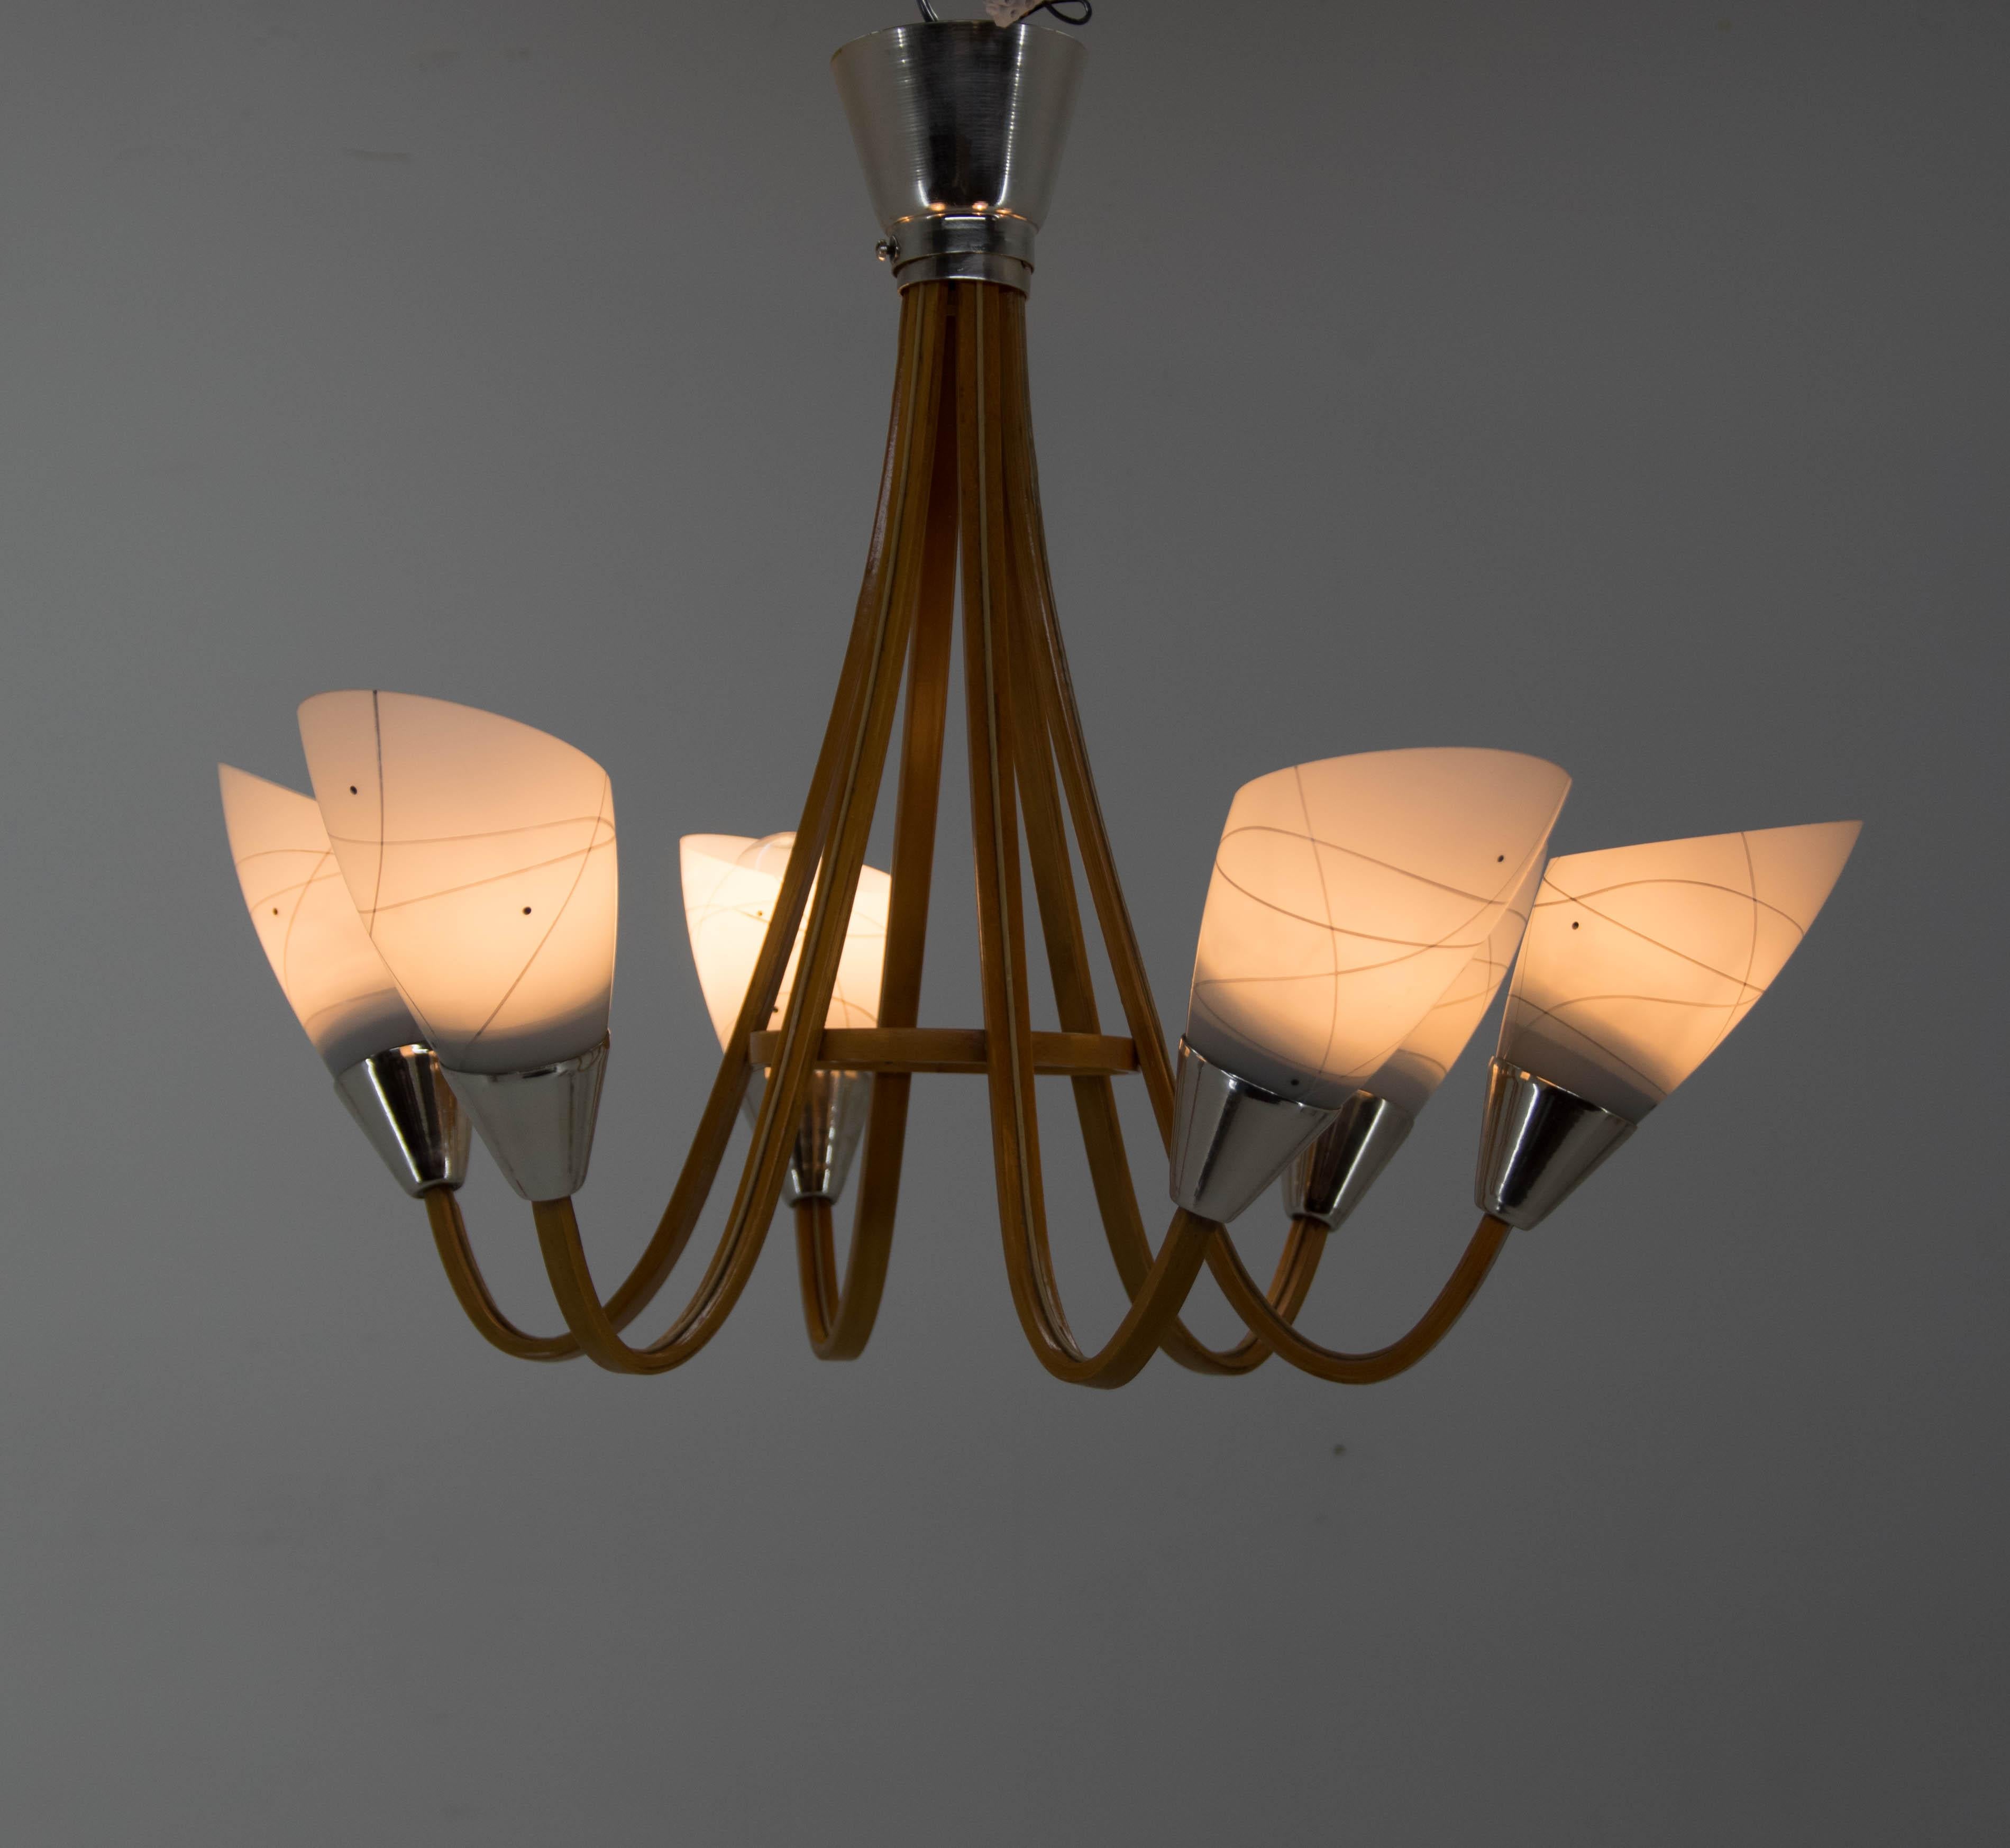 Wood and glass 6-arms chandelier made by Drevo Humpolec in former Czechoslovakia in the 1960s.
Measures: 6 x 40 W, E25-E27 bulbs.
US wiring compatible.